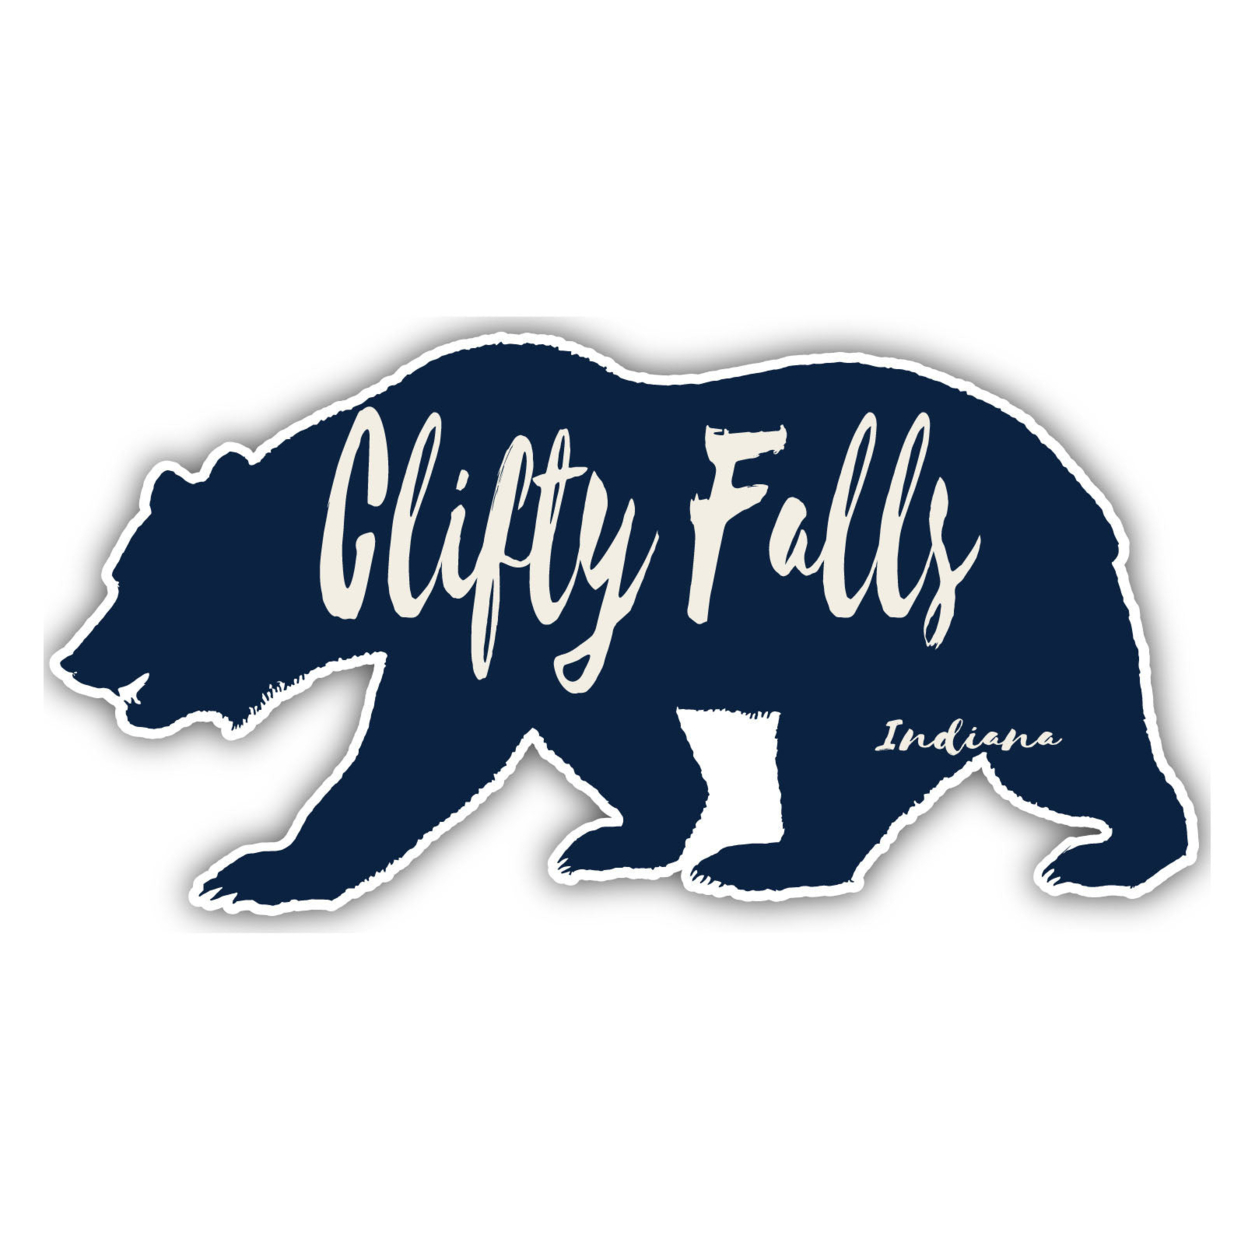 Clifty Falls Indiana Souvenir Decorative Stickers (Choose Theme And Size) - 4-Pack, 12-Inch, Bear